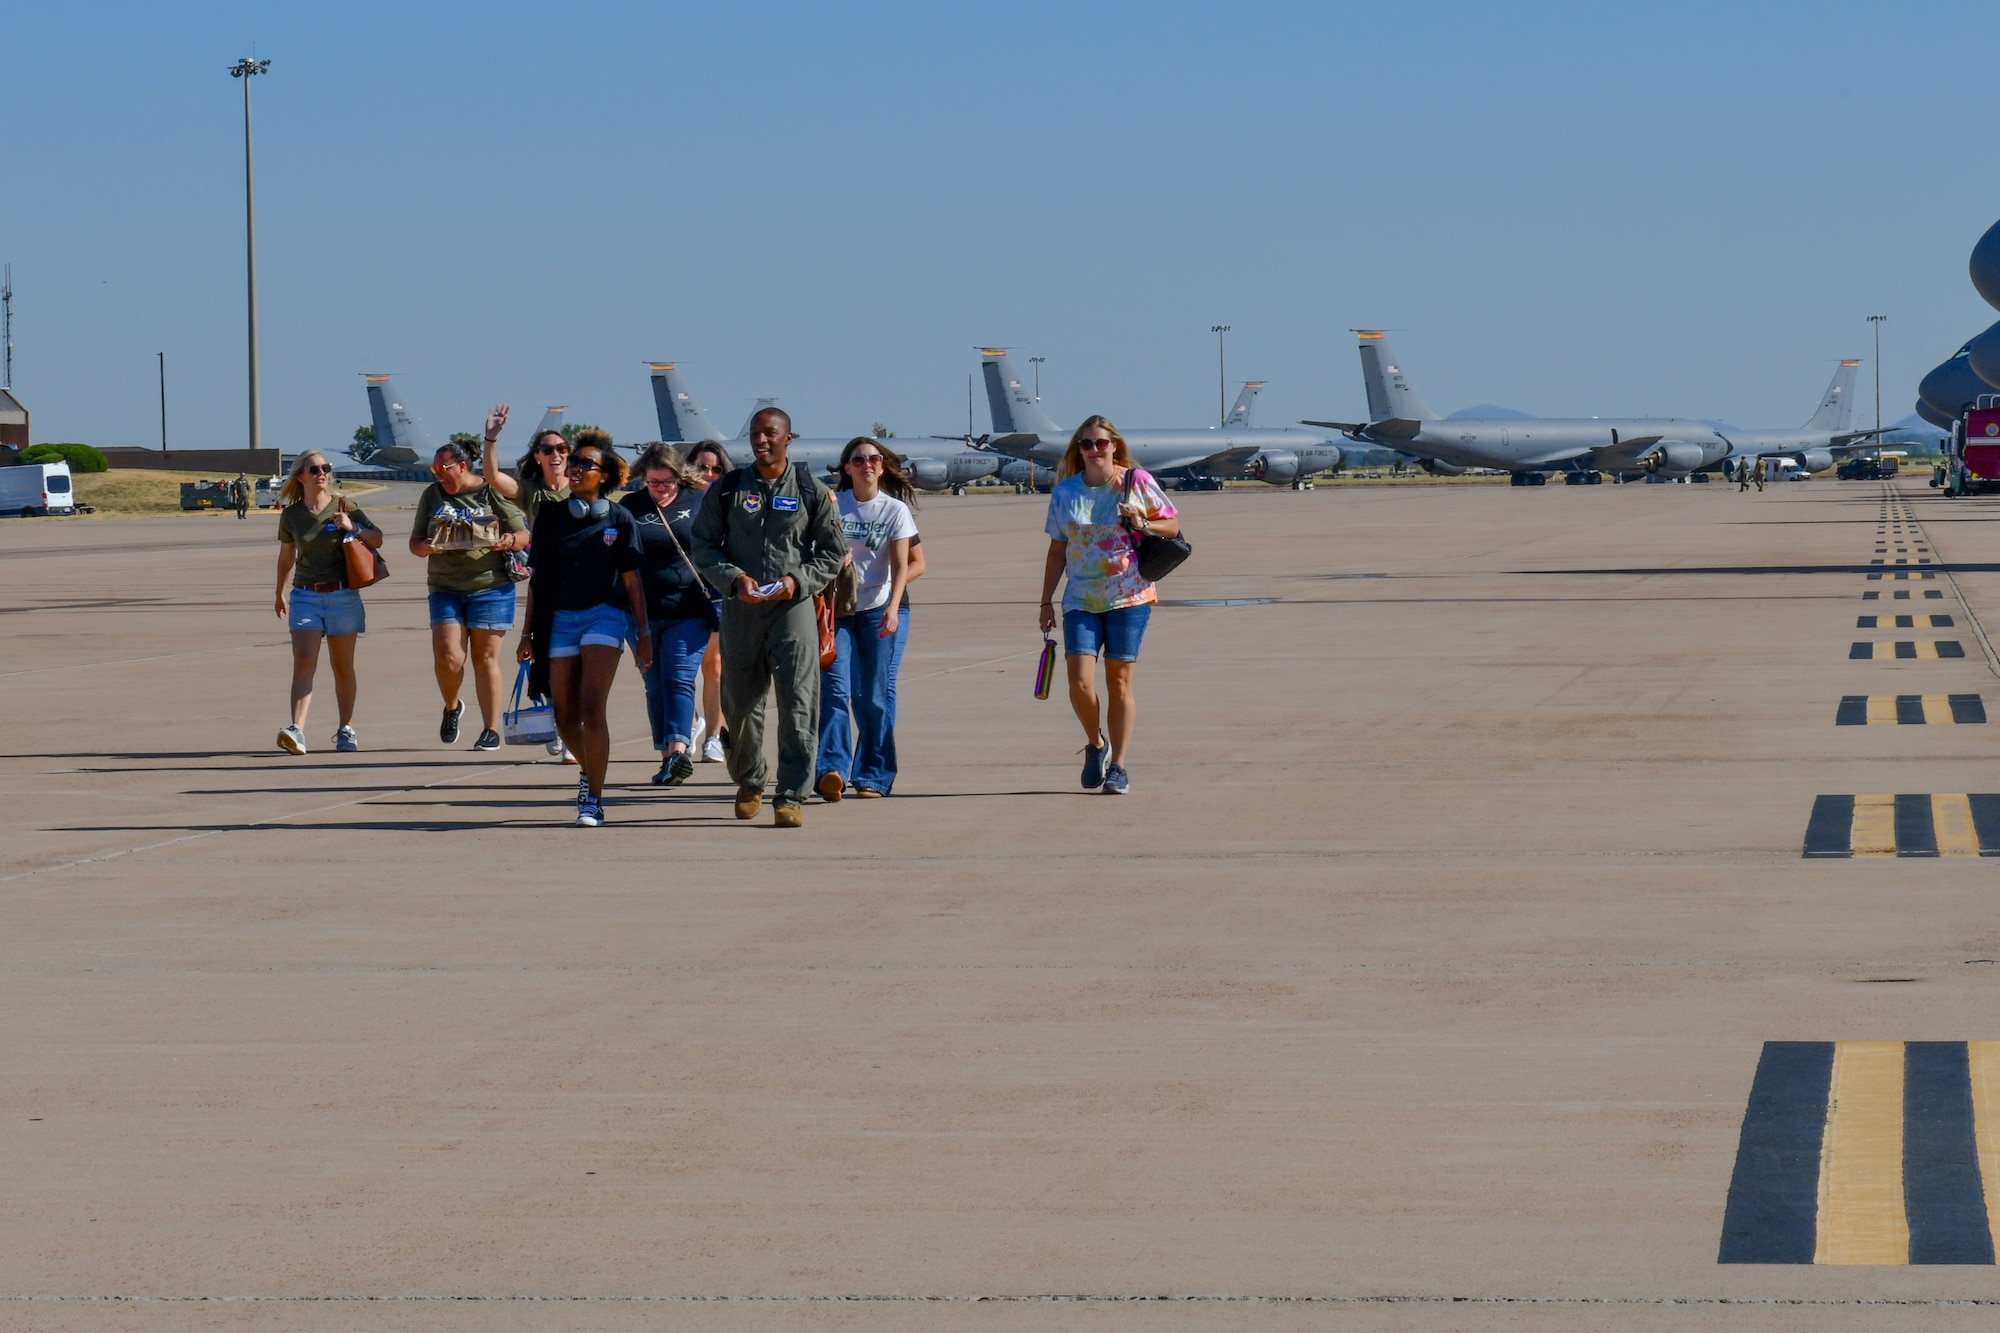 U.S. Air Force Capt. Ryan Smith, 56th Air Refueling Squadron instructor pilot, escorts spouses from the 97th Air Mobility Wing to a KC-46 Pegasus at Altus Air Force Base, Oklahoma, July 11, 2022. The spouses participated in an orientation flight to experience aerial refueling. (U.S. Air Force photo by Airman 1st Class Miyah Gray)